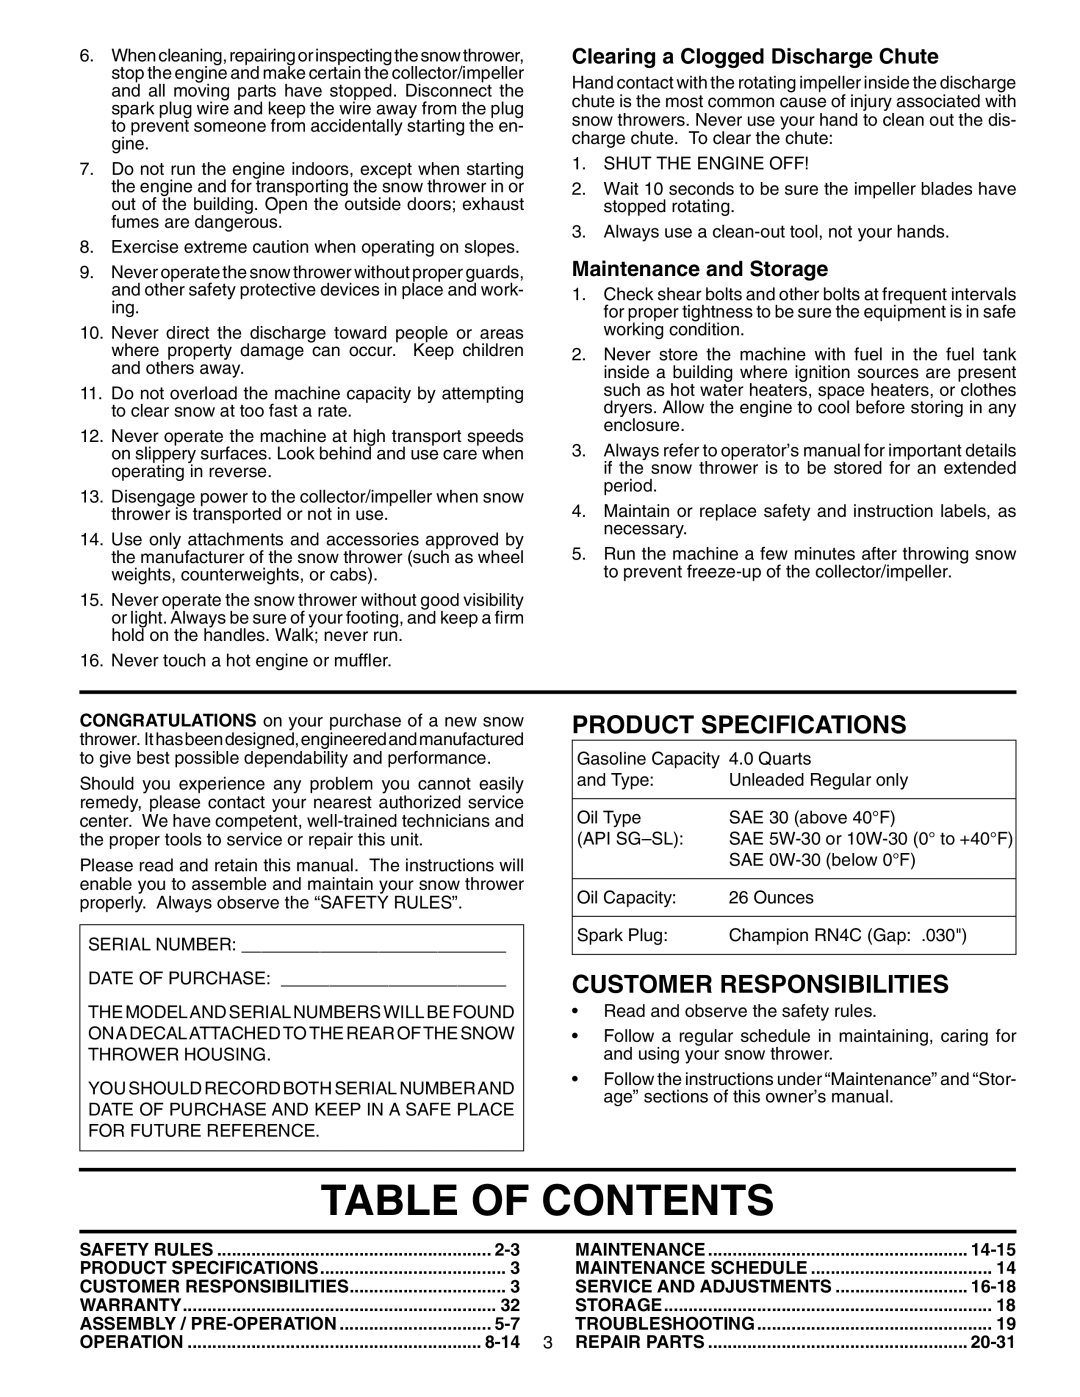 Husqvarna 1130SBE-OV Table Of Contents, Product Specifications, Customer Responsibilities, Maintenance and Storage, 8-14 